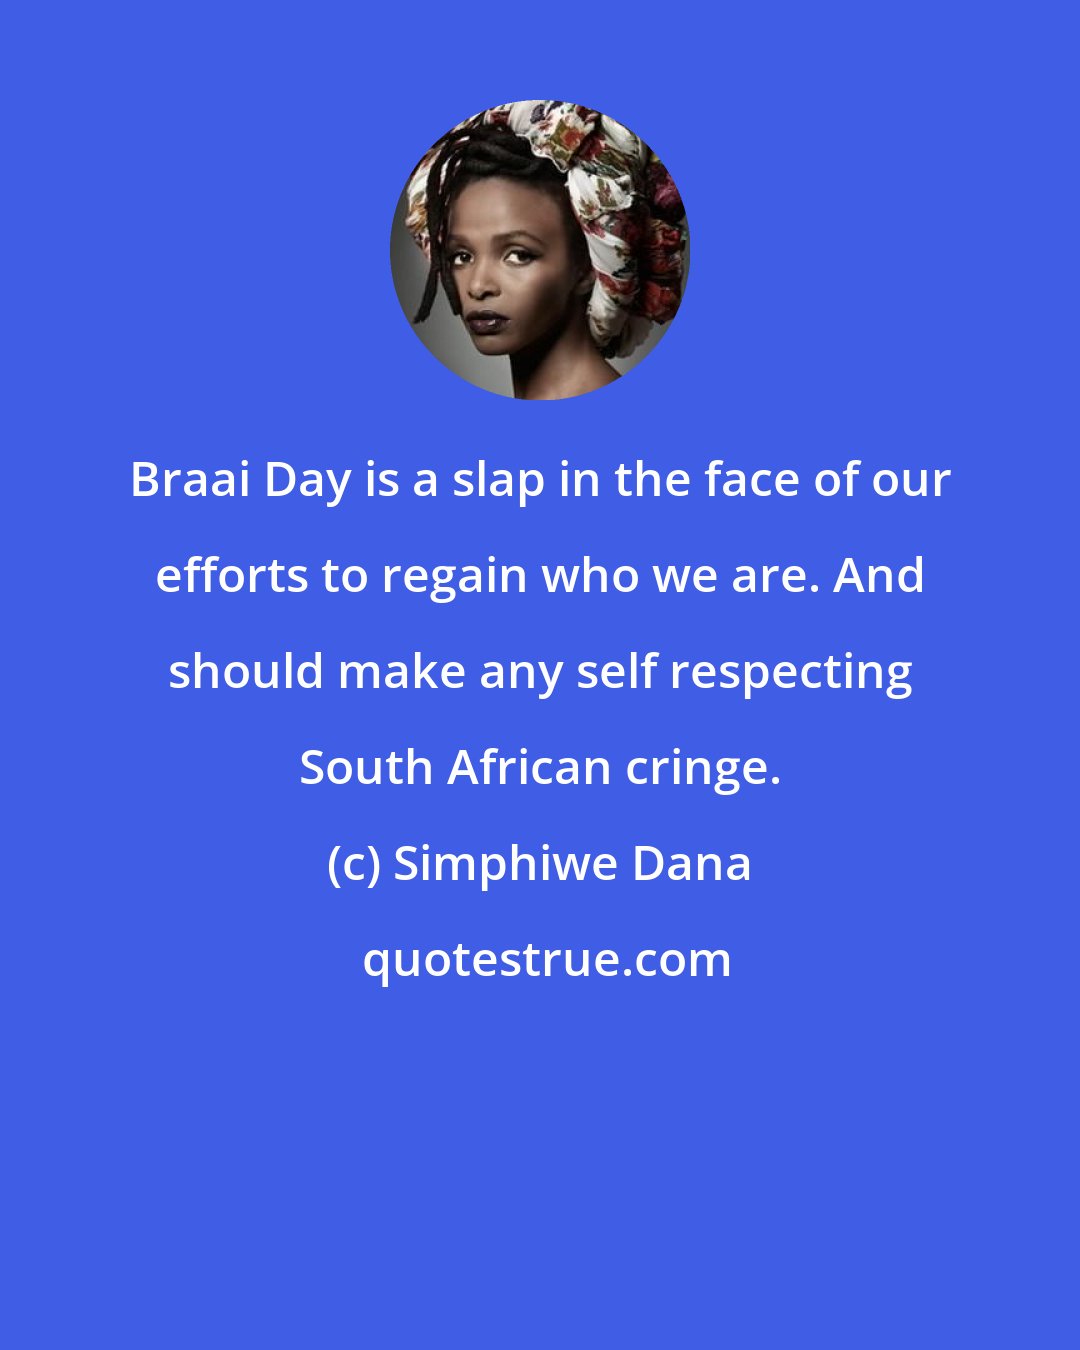 Simphiwe Dana: Braai Day is a slap in the face of our efforts to regain who we are. And should make any self respecting South African cringe.